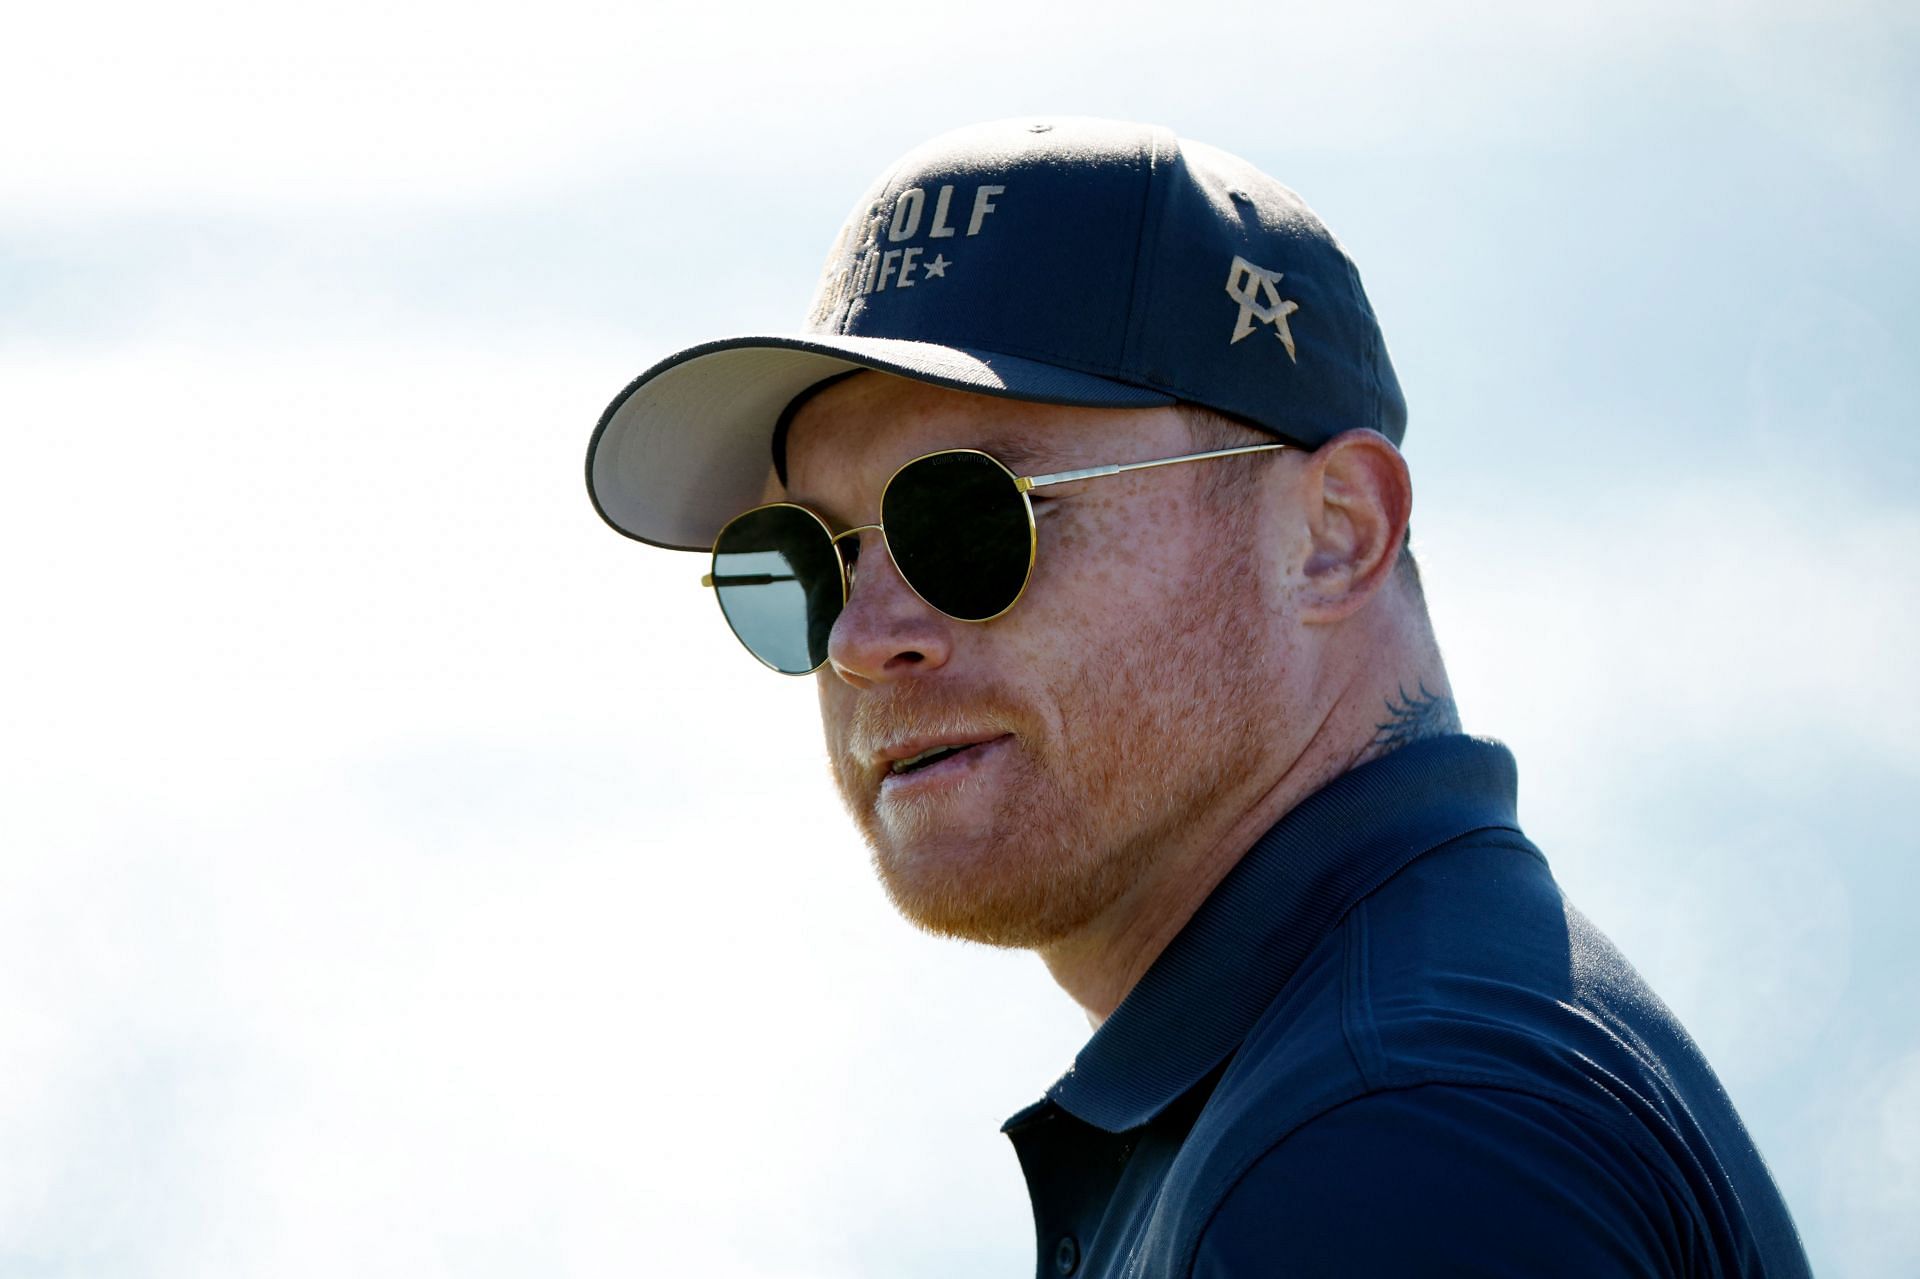 Canelo Alvarez (pictured) has taken to social media to show off his newest vehicle